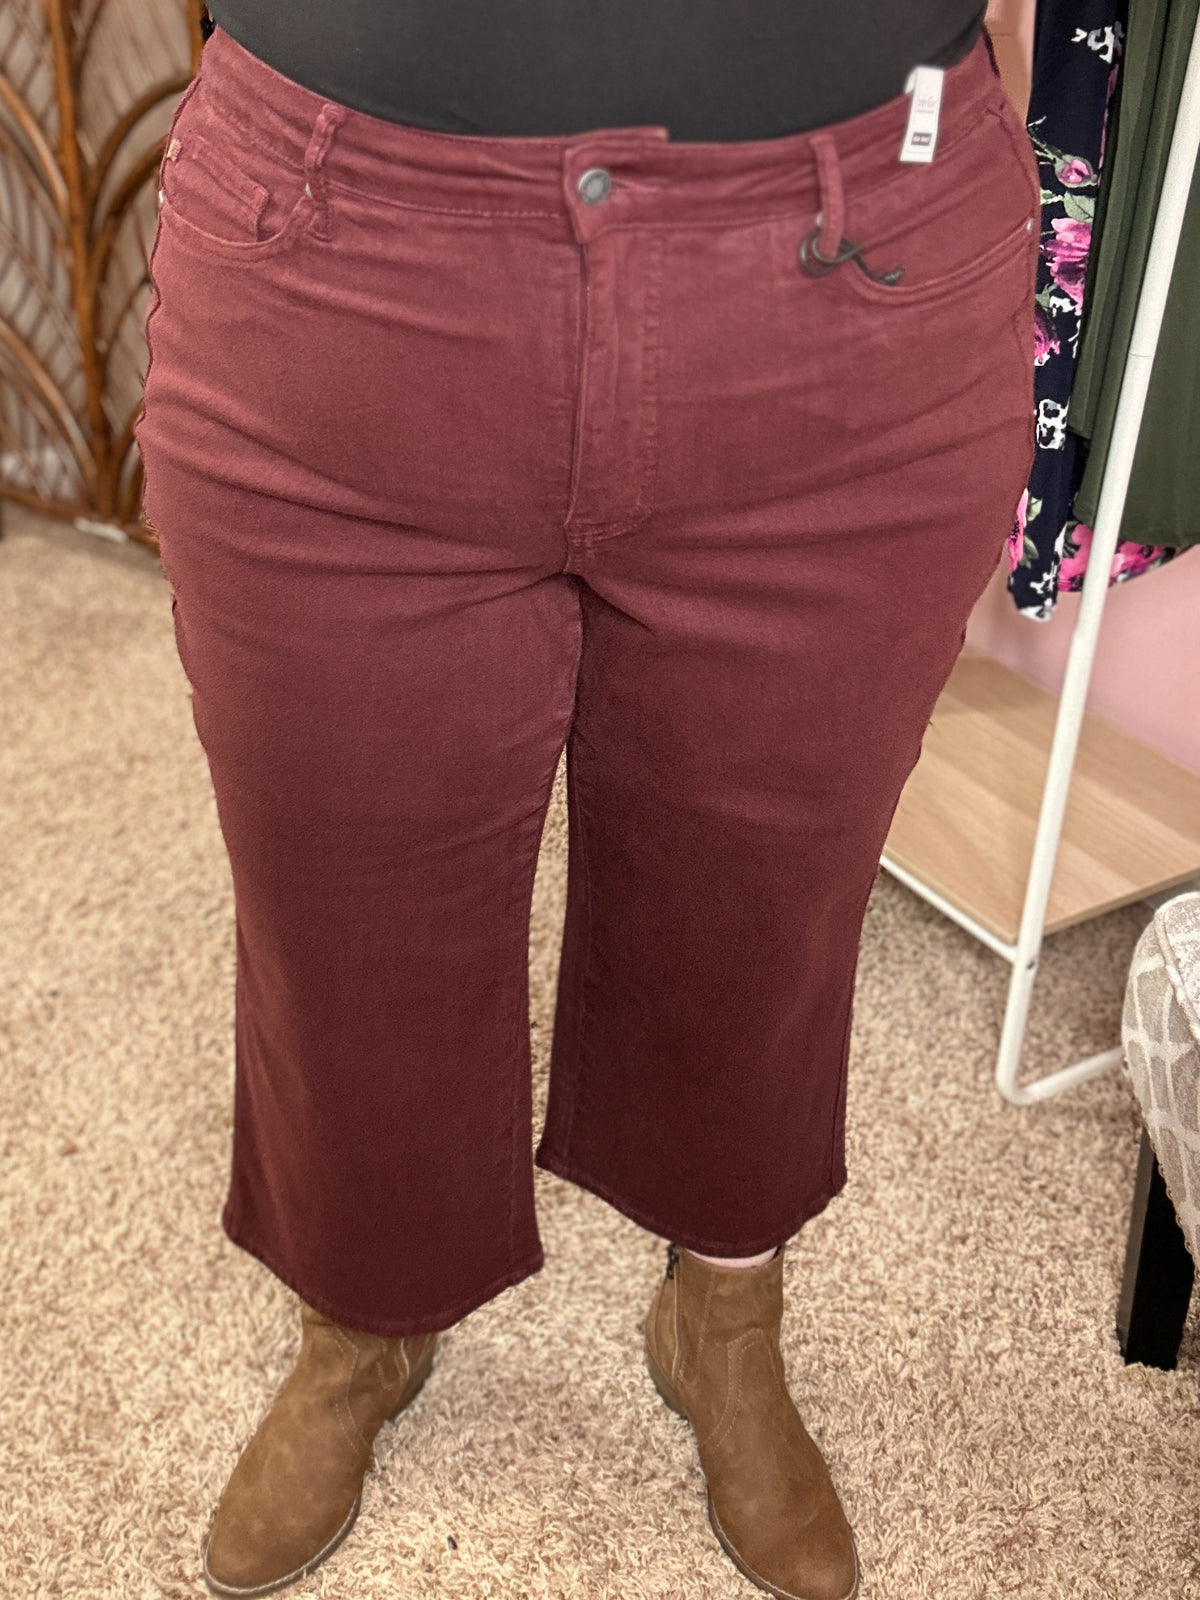 Just This Once Tummy Control Cropped Judy Blue Jeans - Oxblood